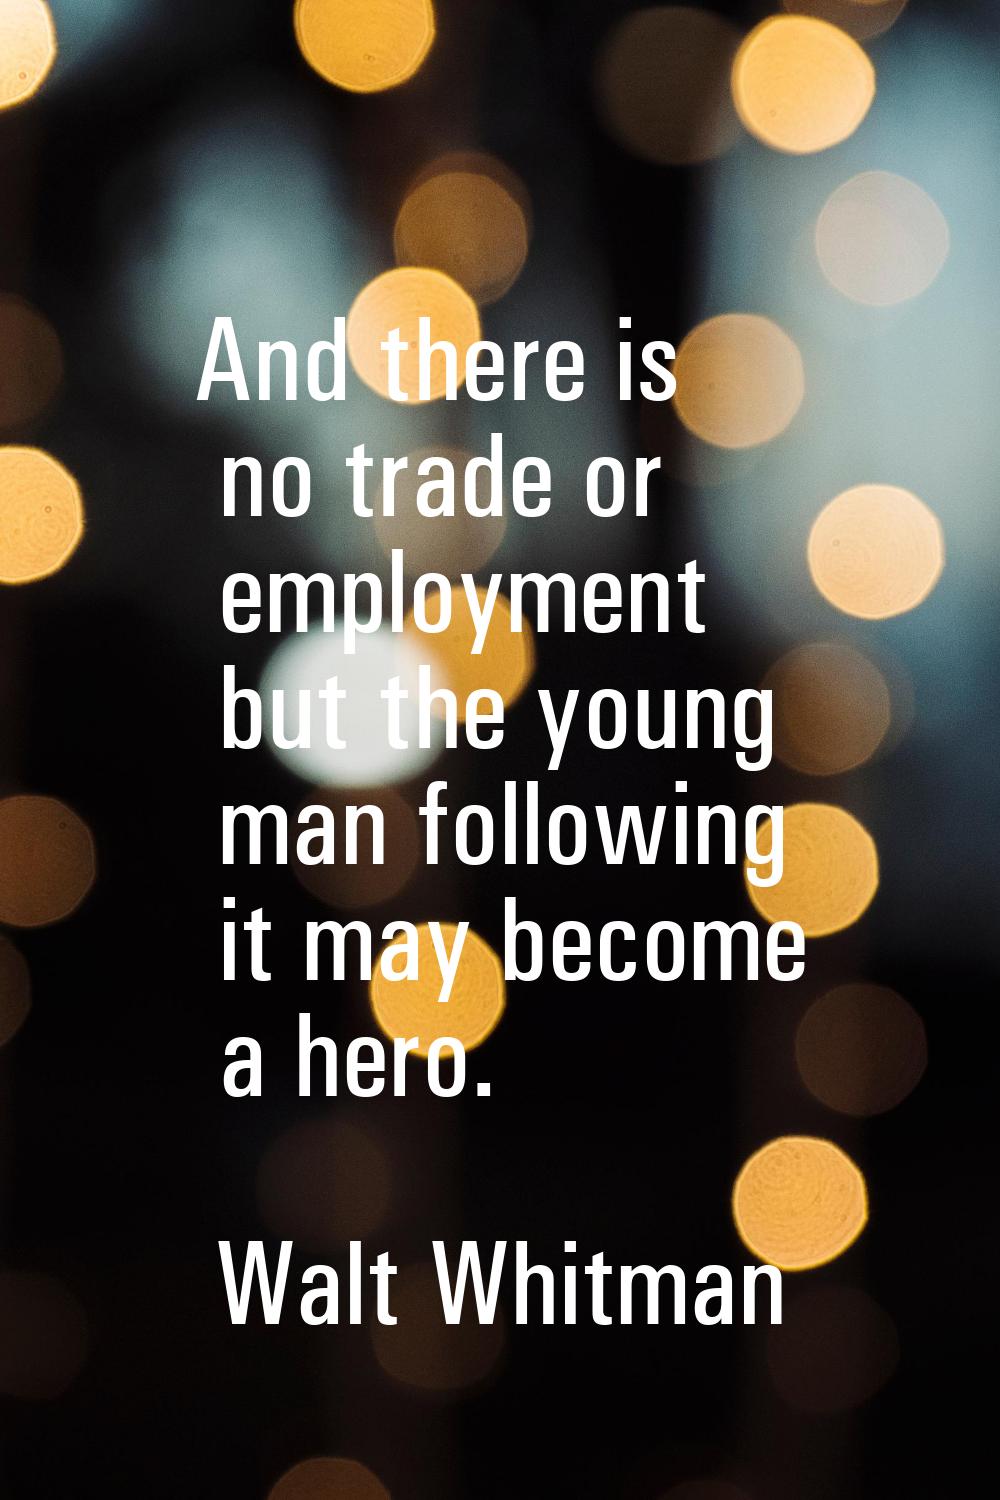 And there is no trade or employment but the young man following it may become a hero.